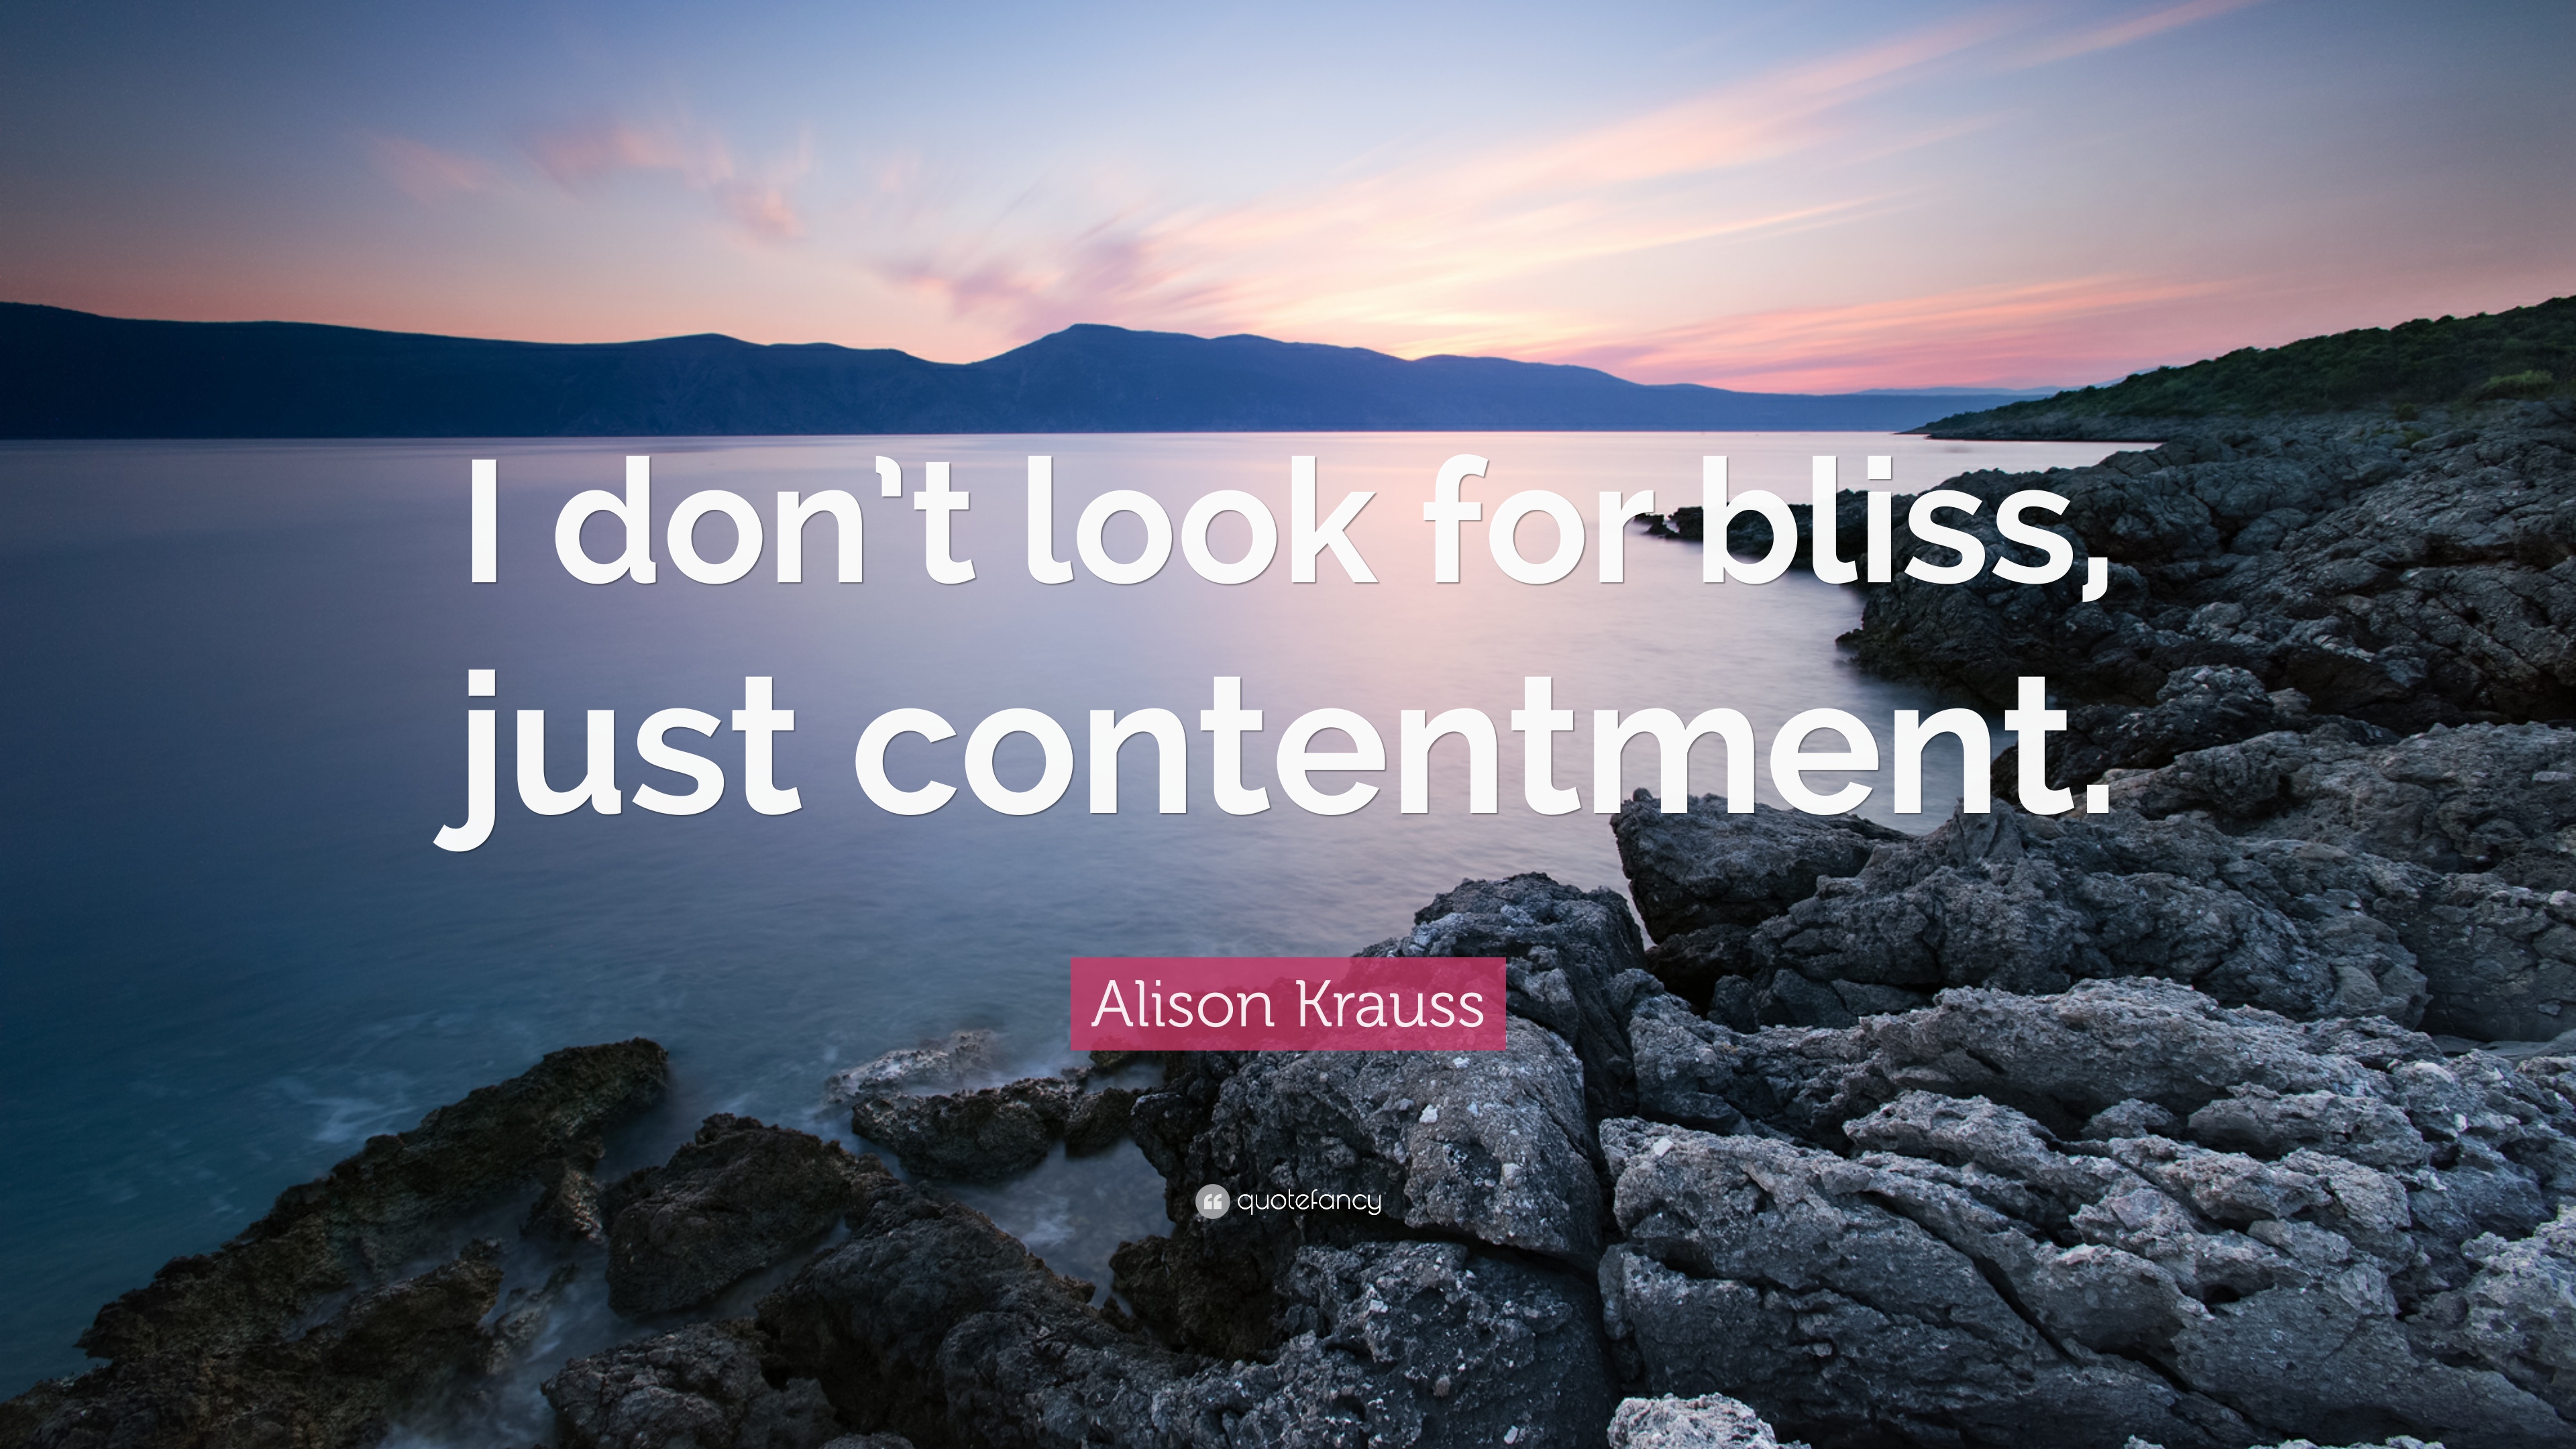 Alison Krauss Quote: “I don't look for bliss, just contentment.” 7